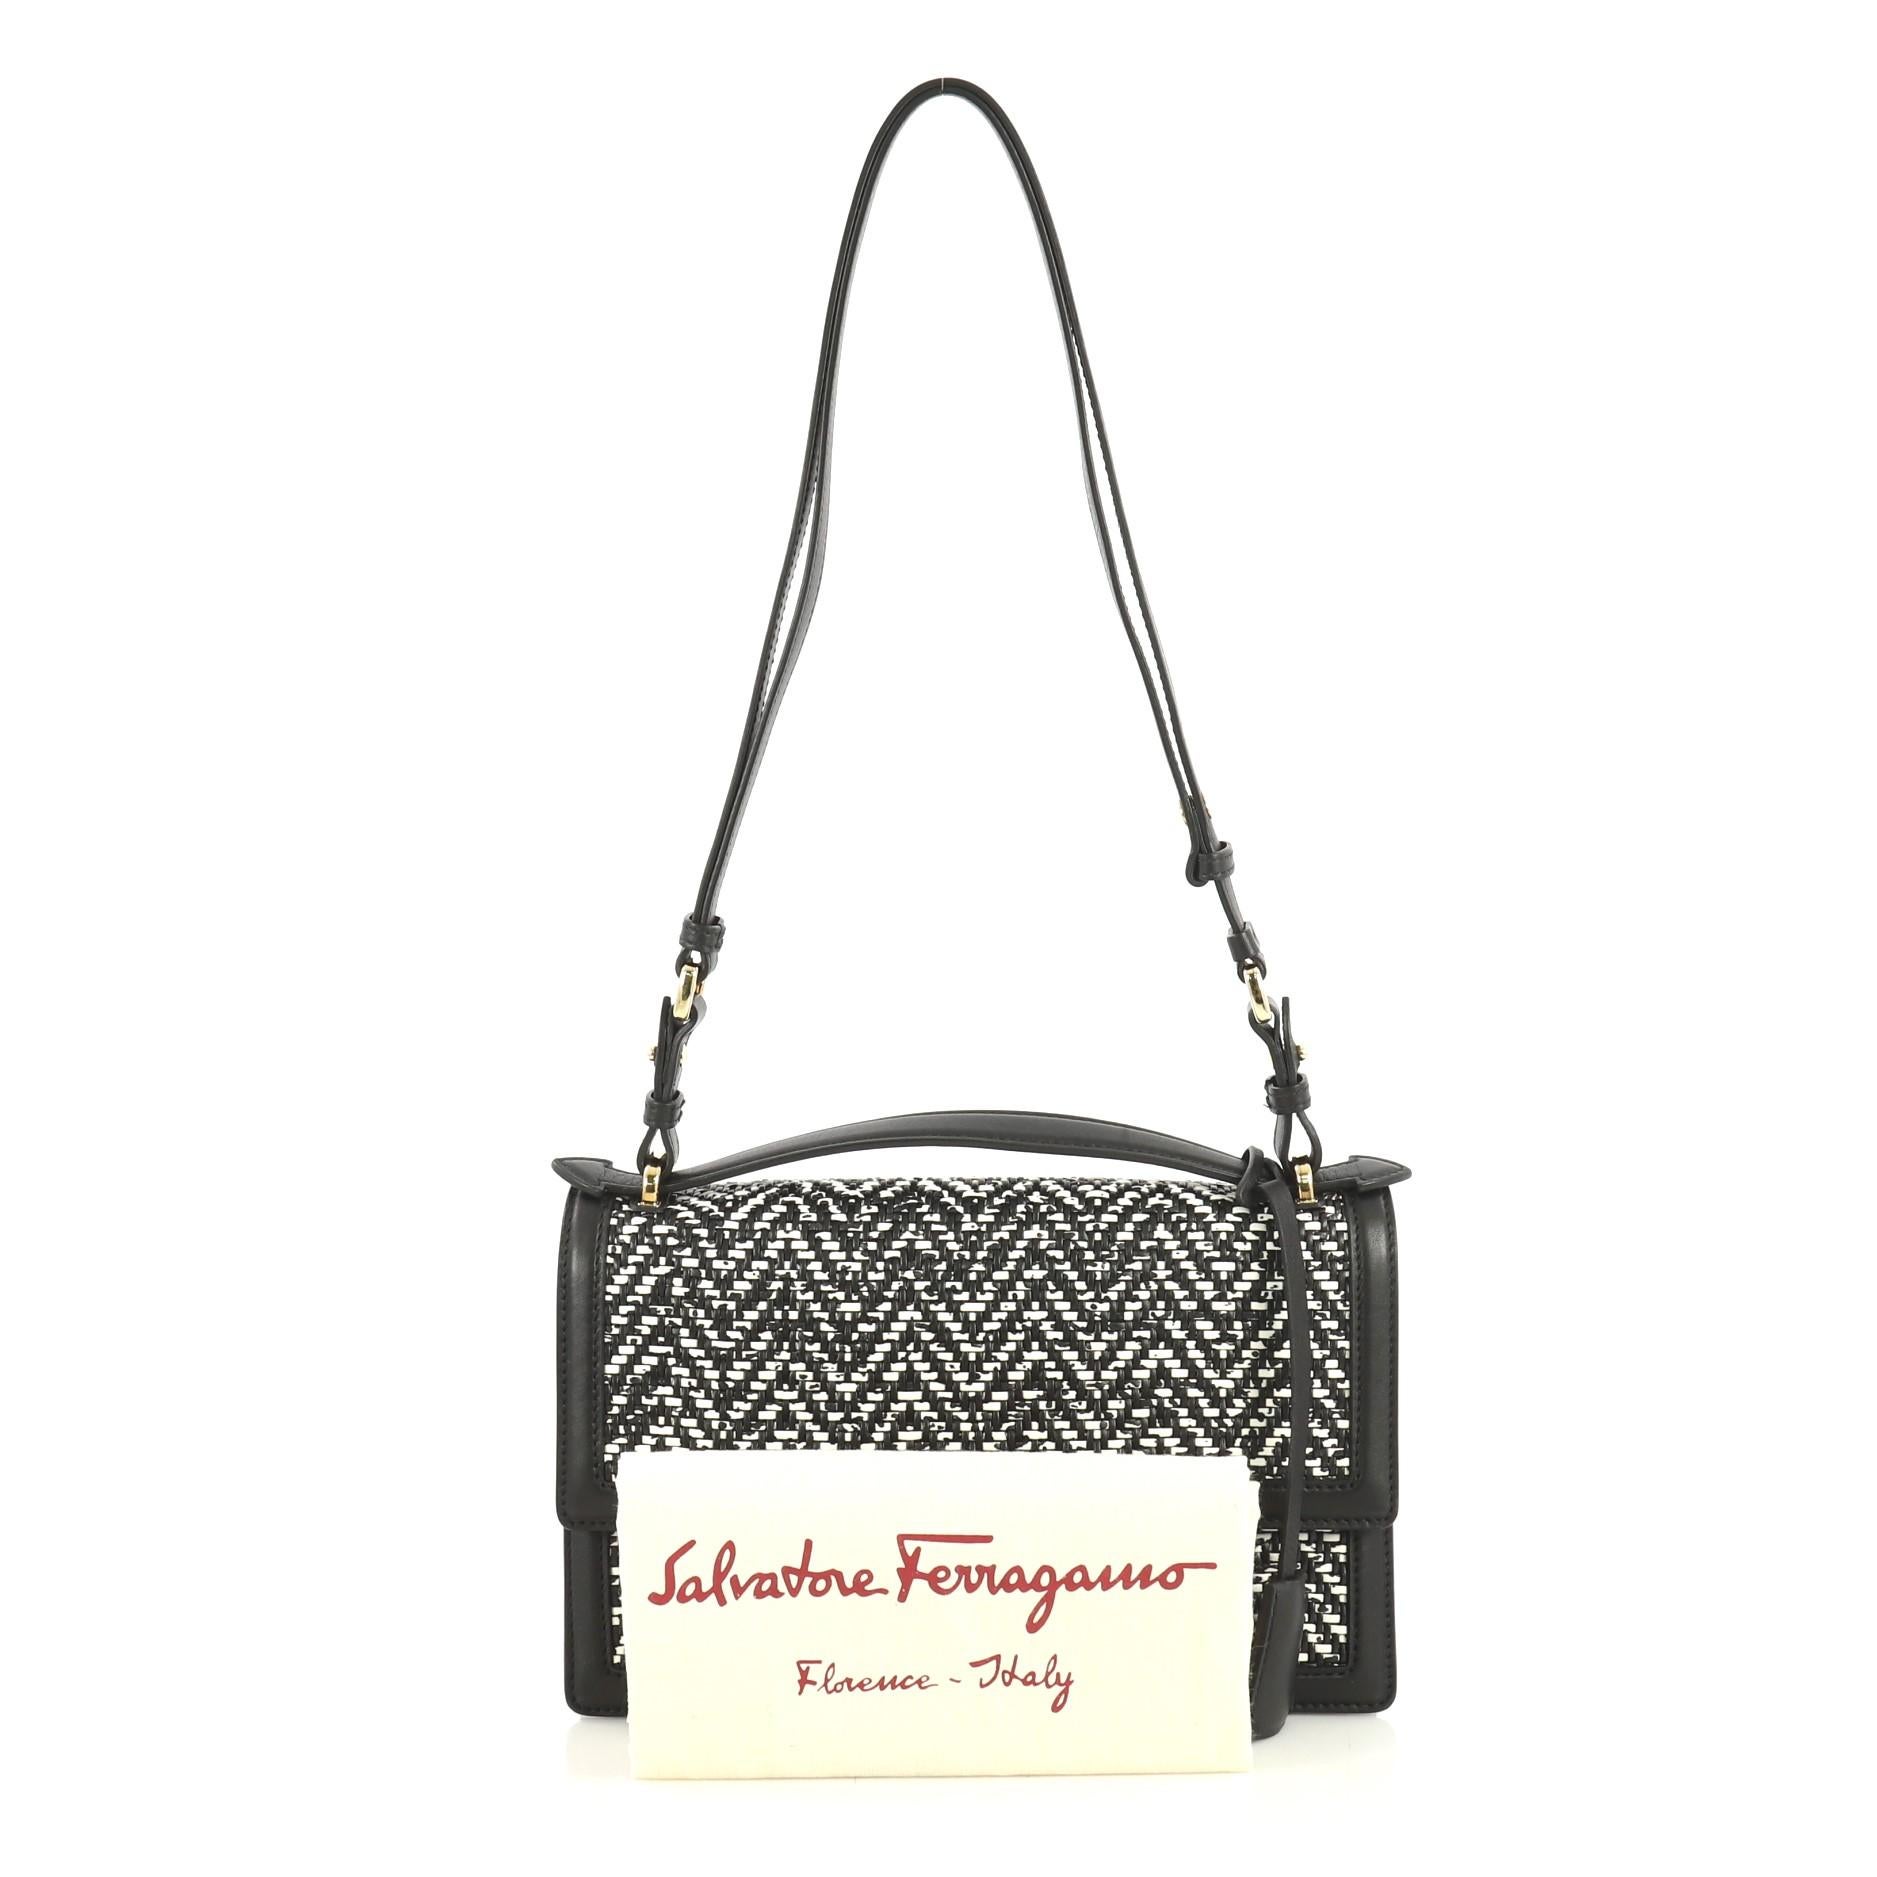 This Salvatore Ferragamo Aileen Shoulder Bag Woven Leather Medium, crafted from black woven leather, features an adjustable shoulder strap and gold-tone hardware. Its clasp closure opens to a black leather interior with zip pocket. 

Estimated